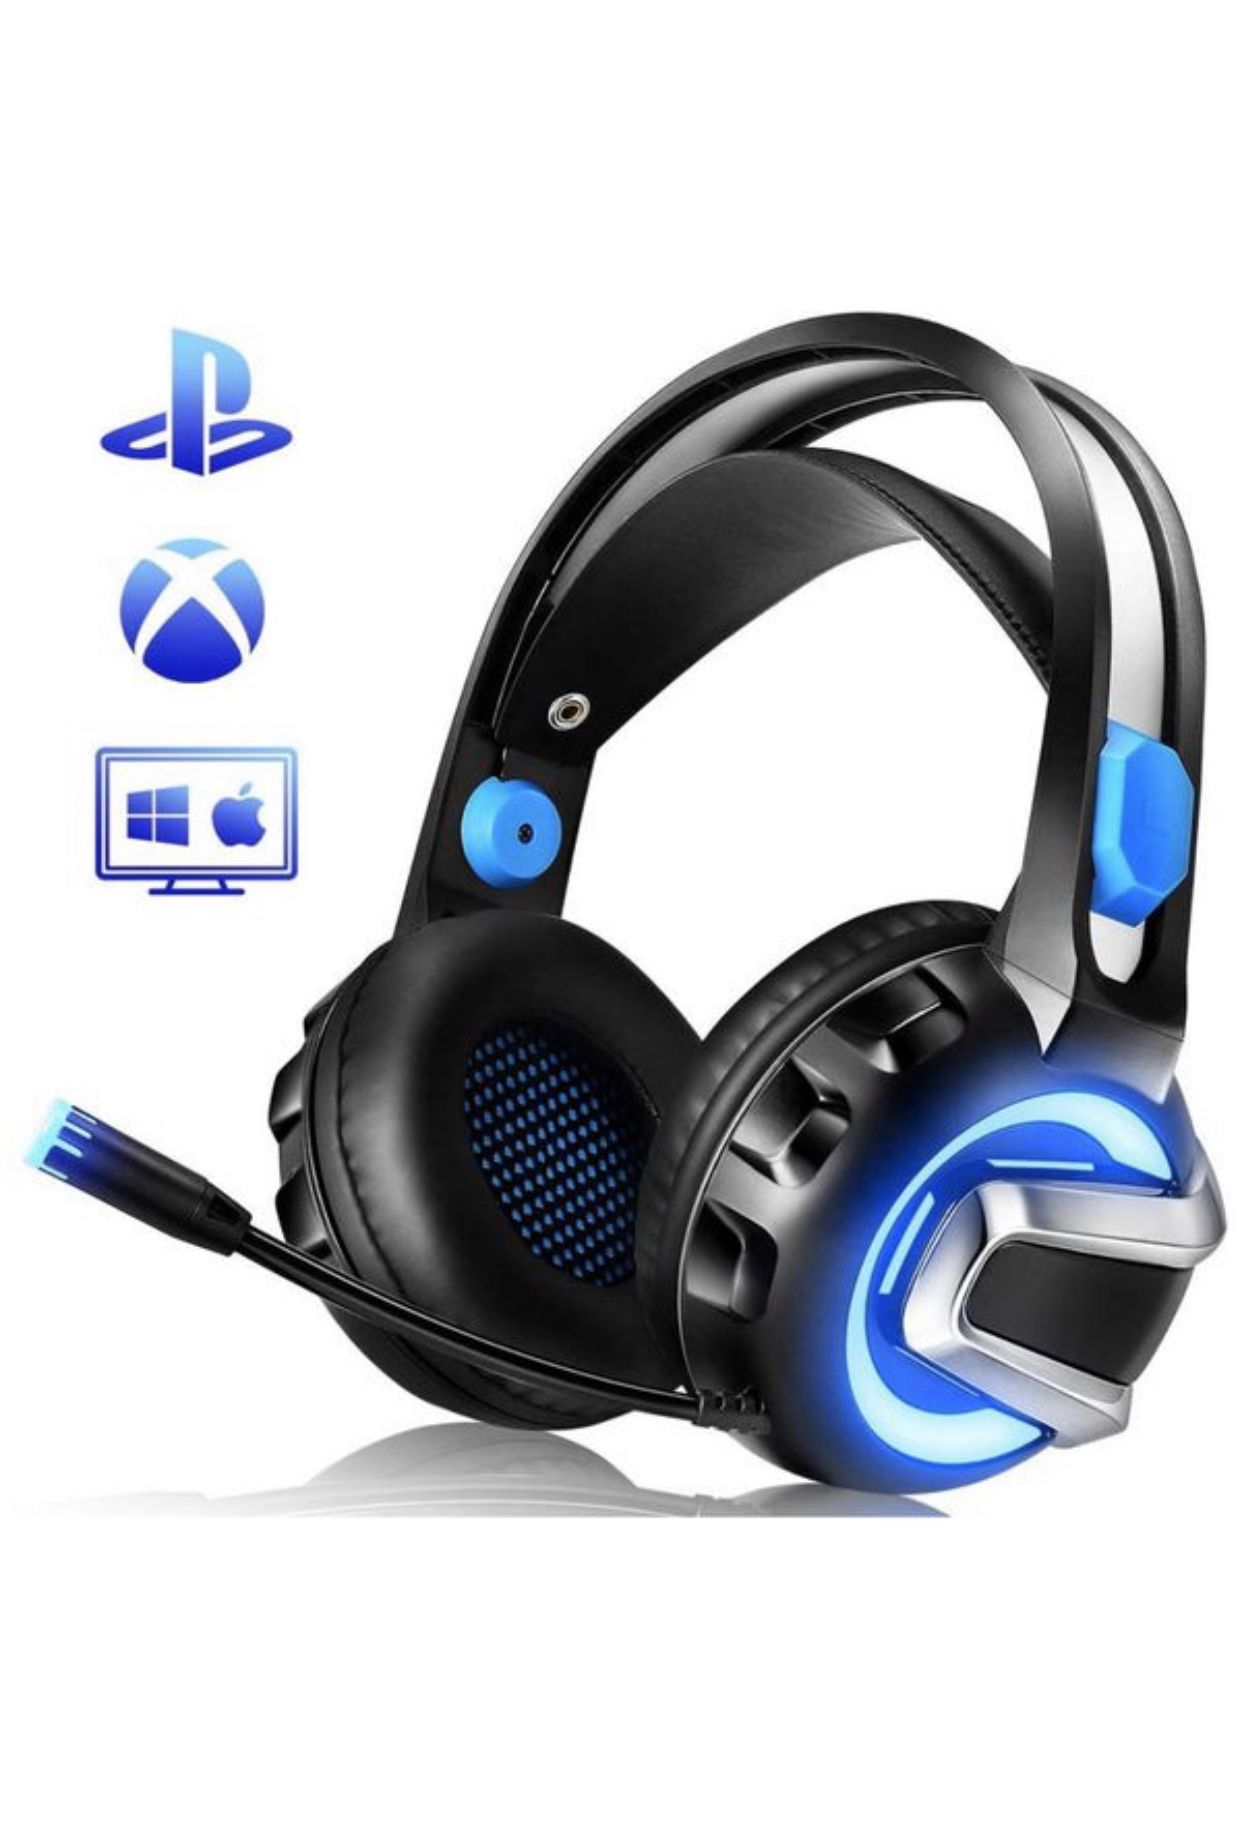 NiceWell Gaming Headset for Xbox One, PS4, PC, Gaming Headphones Wired with Microphone, LED Light, Stereo Sound, Noise-canceling, Over-Ear Soft Earmu